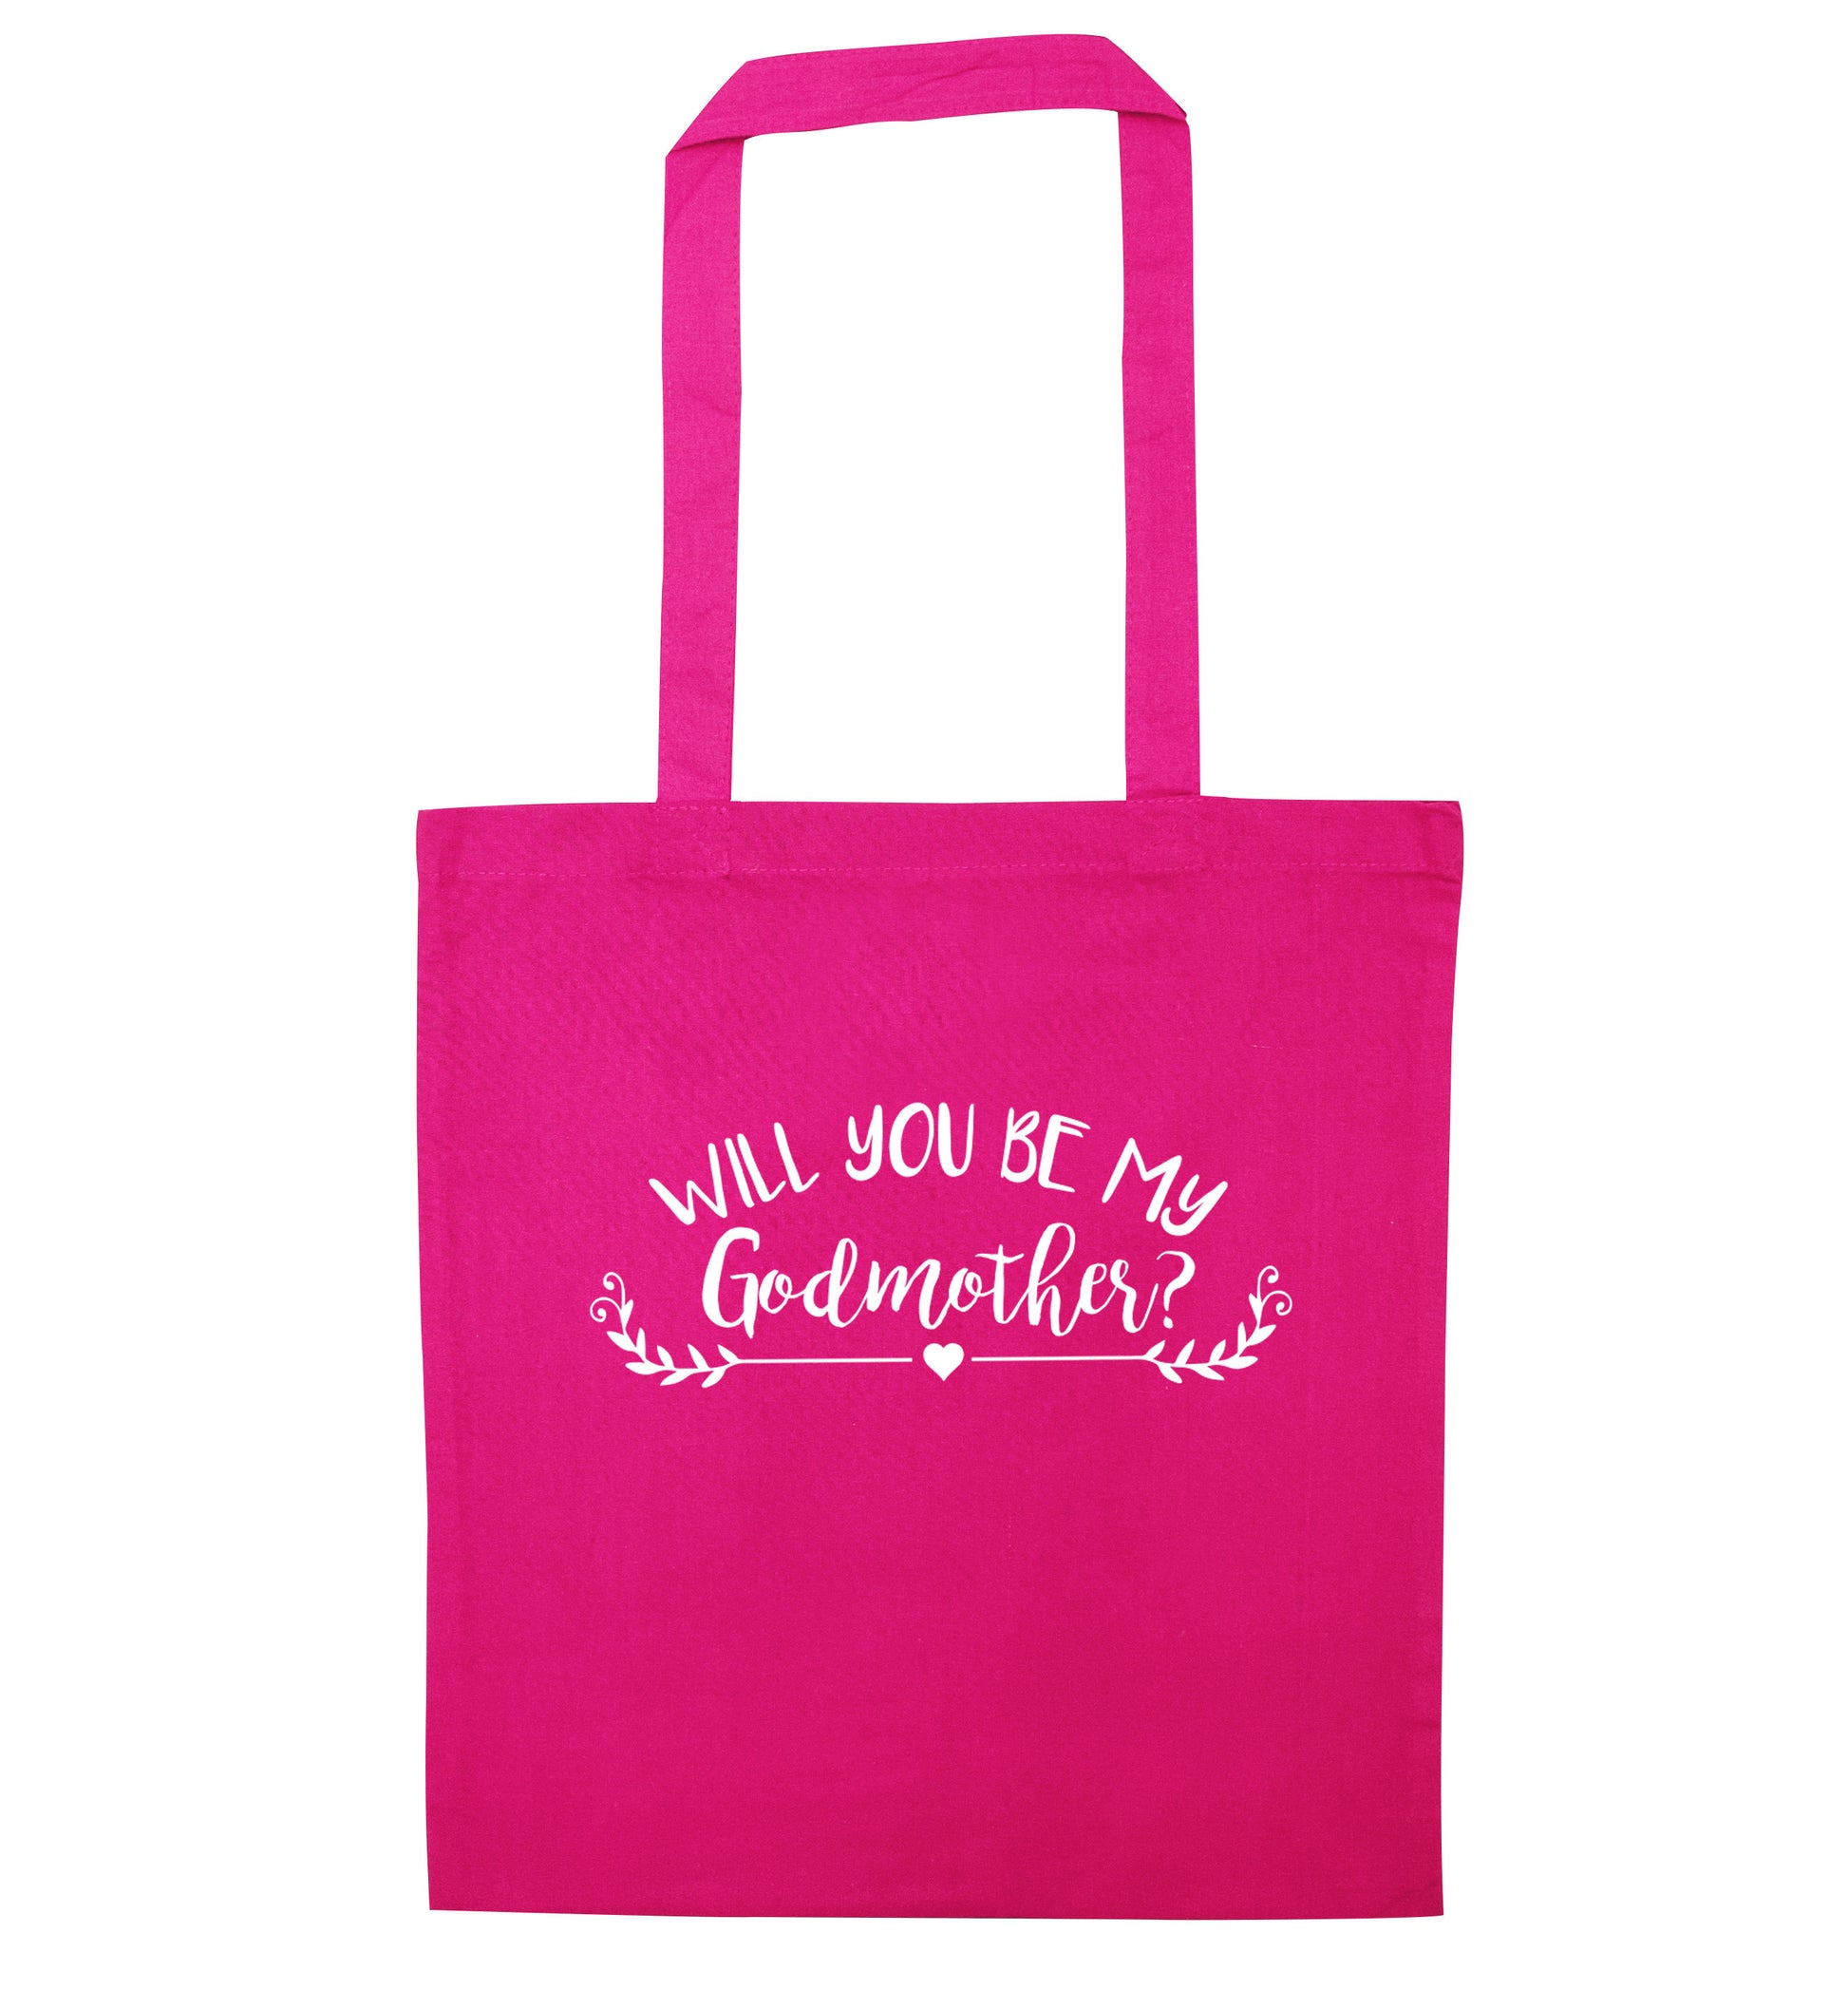 Will you be my godmother? pink tote bag